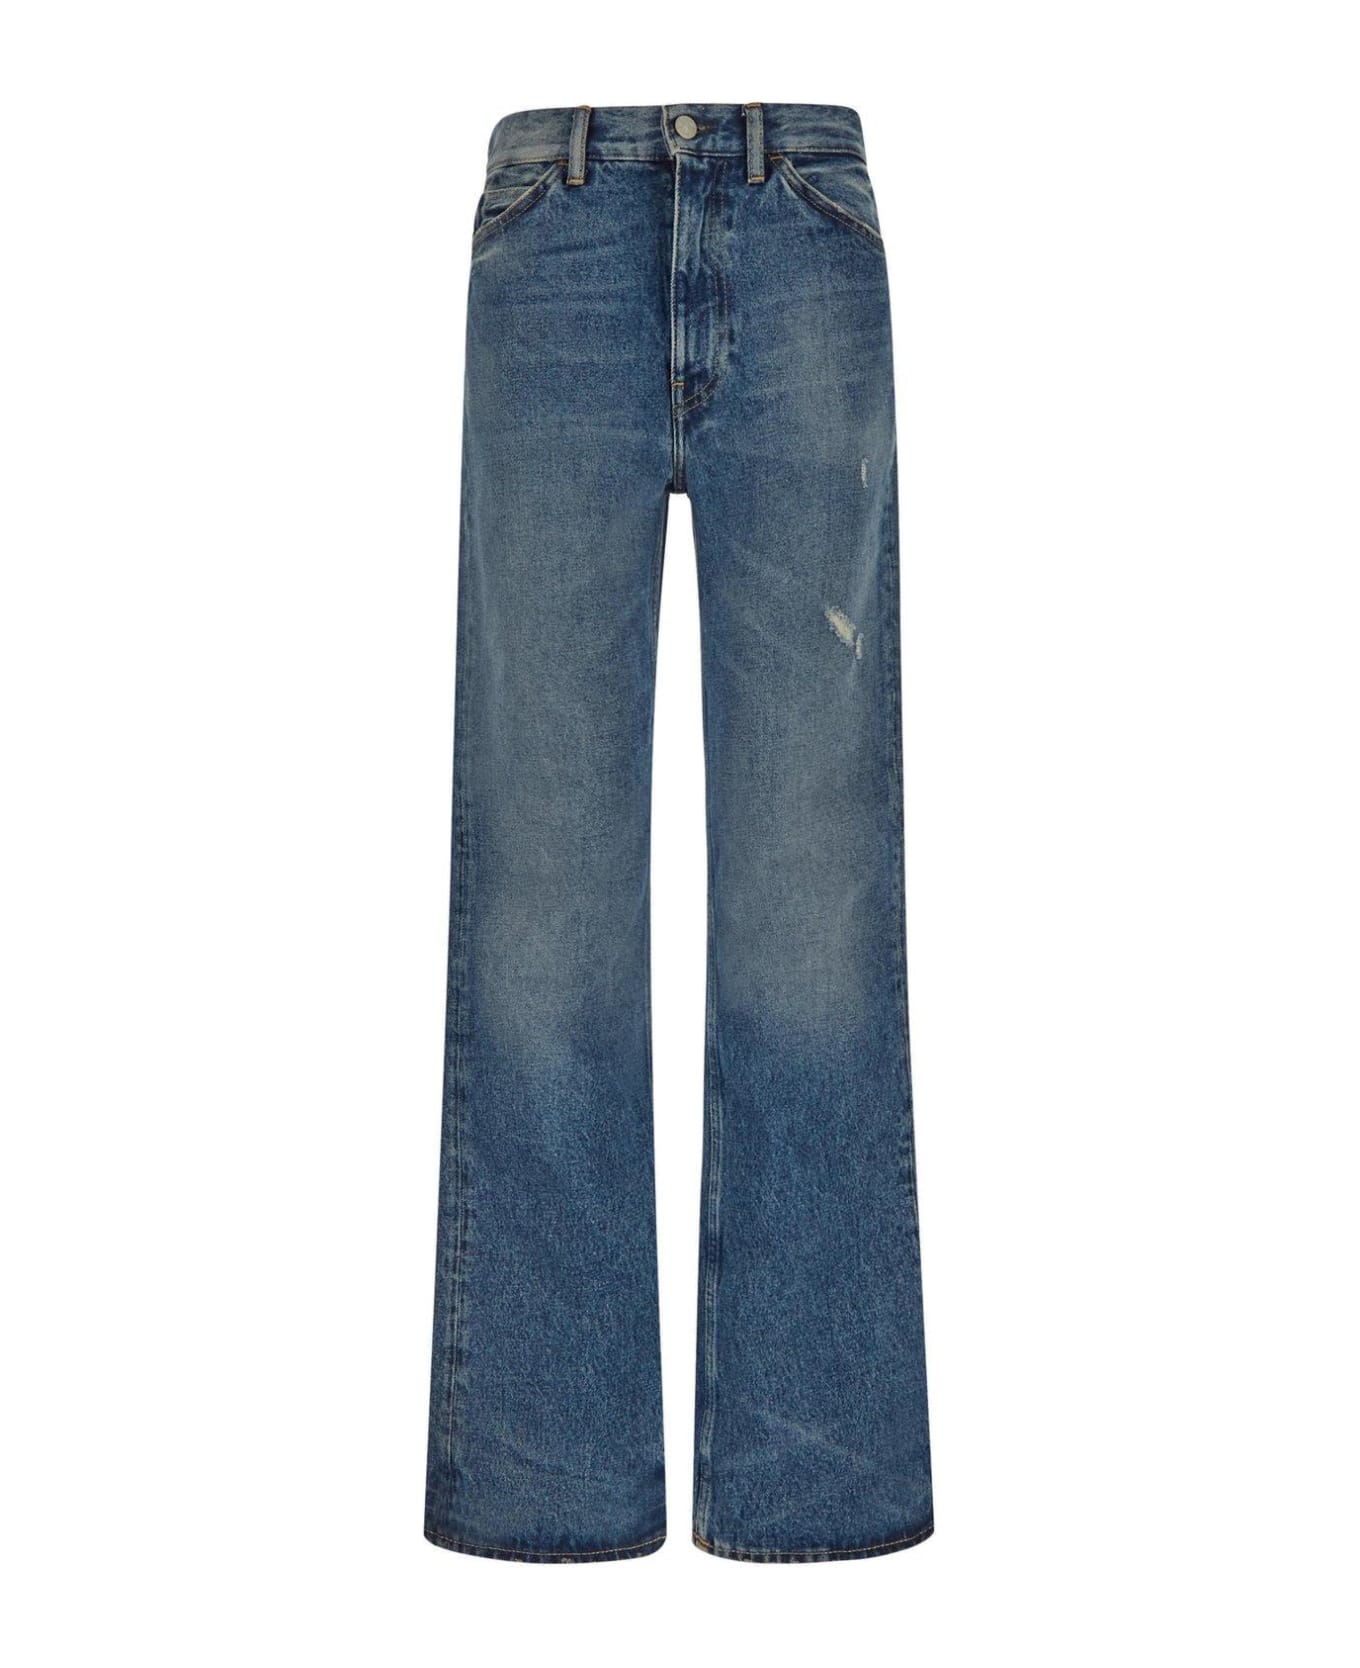 Acne Studios Distressed Mid-rise Jeans - Blue